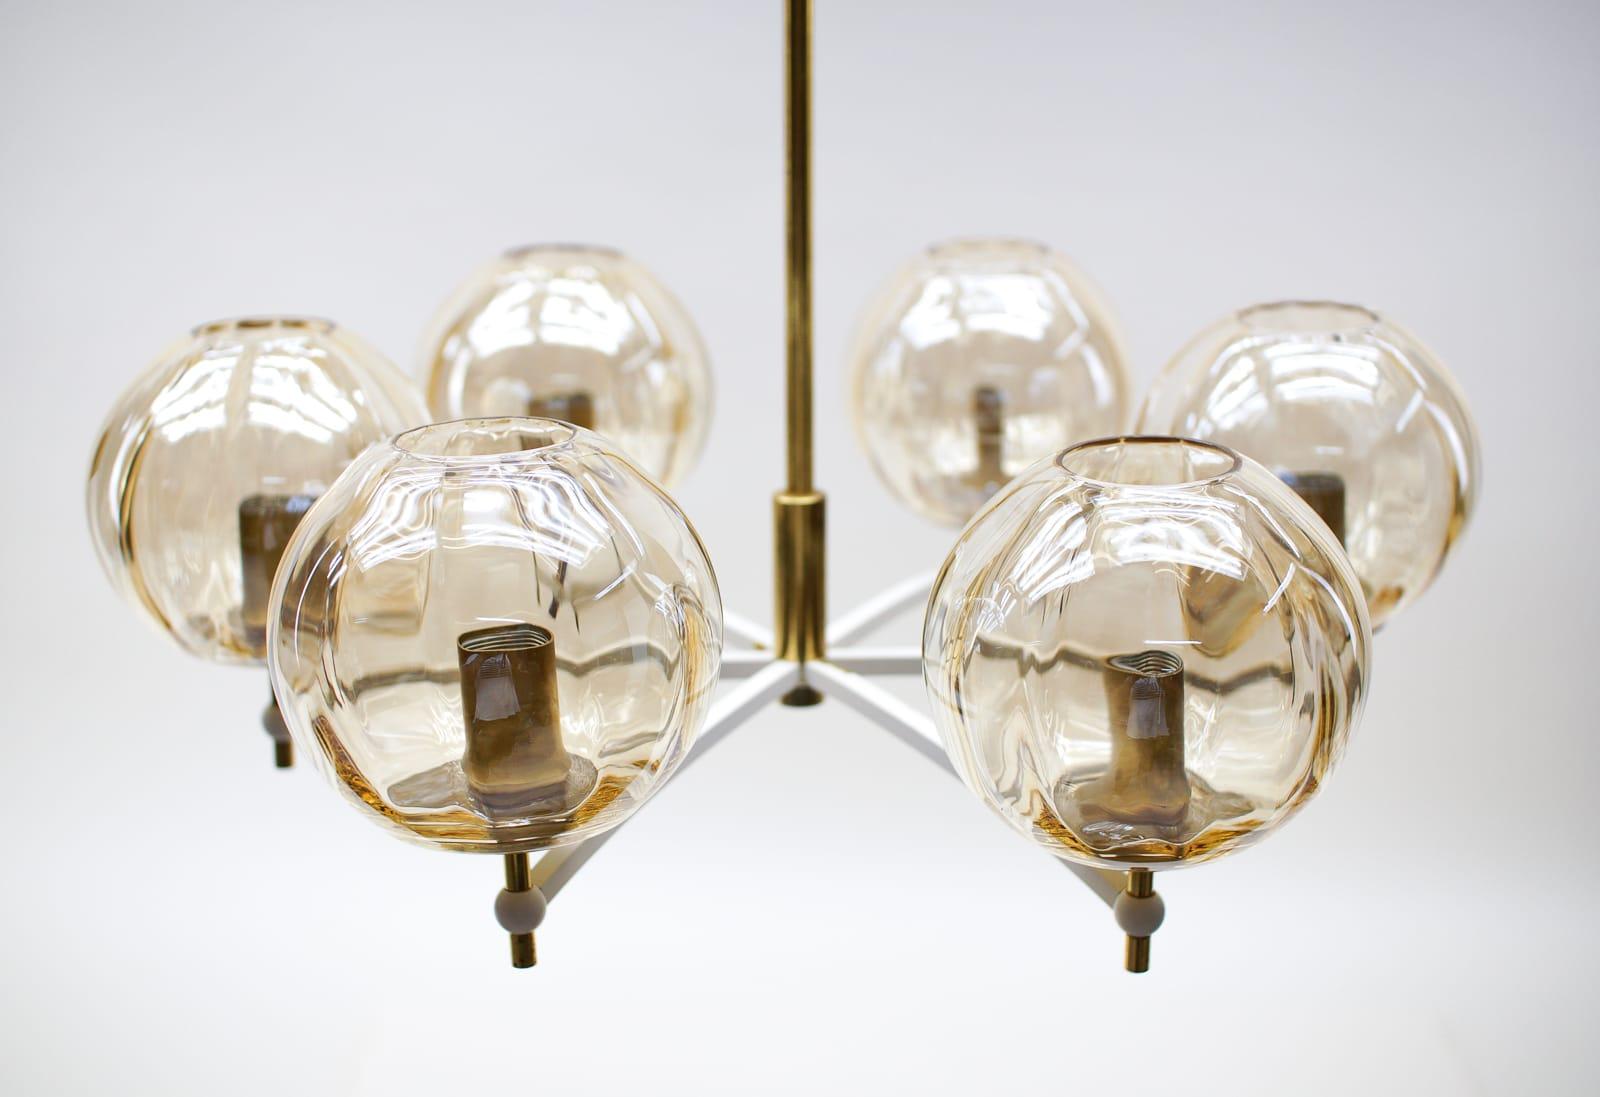 Elegant Mid-Century Modern Orbit Ceiling Lamp in Amber Glass and Brass, 1960s For Sale 2